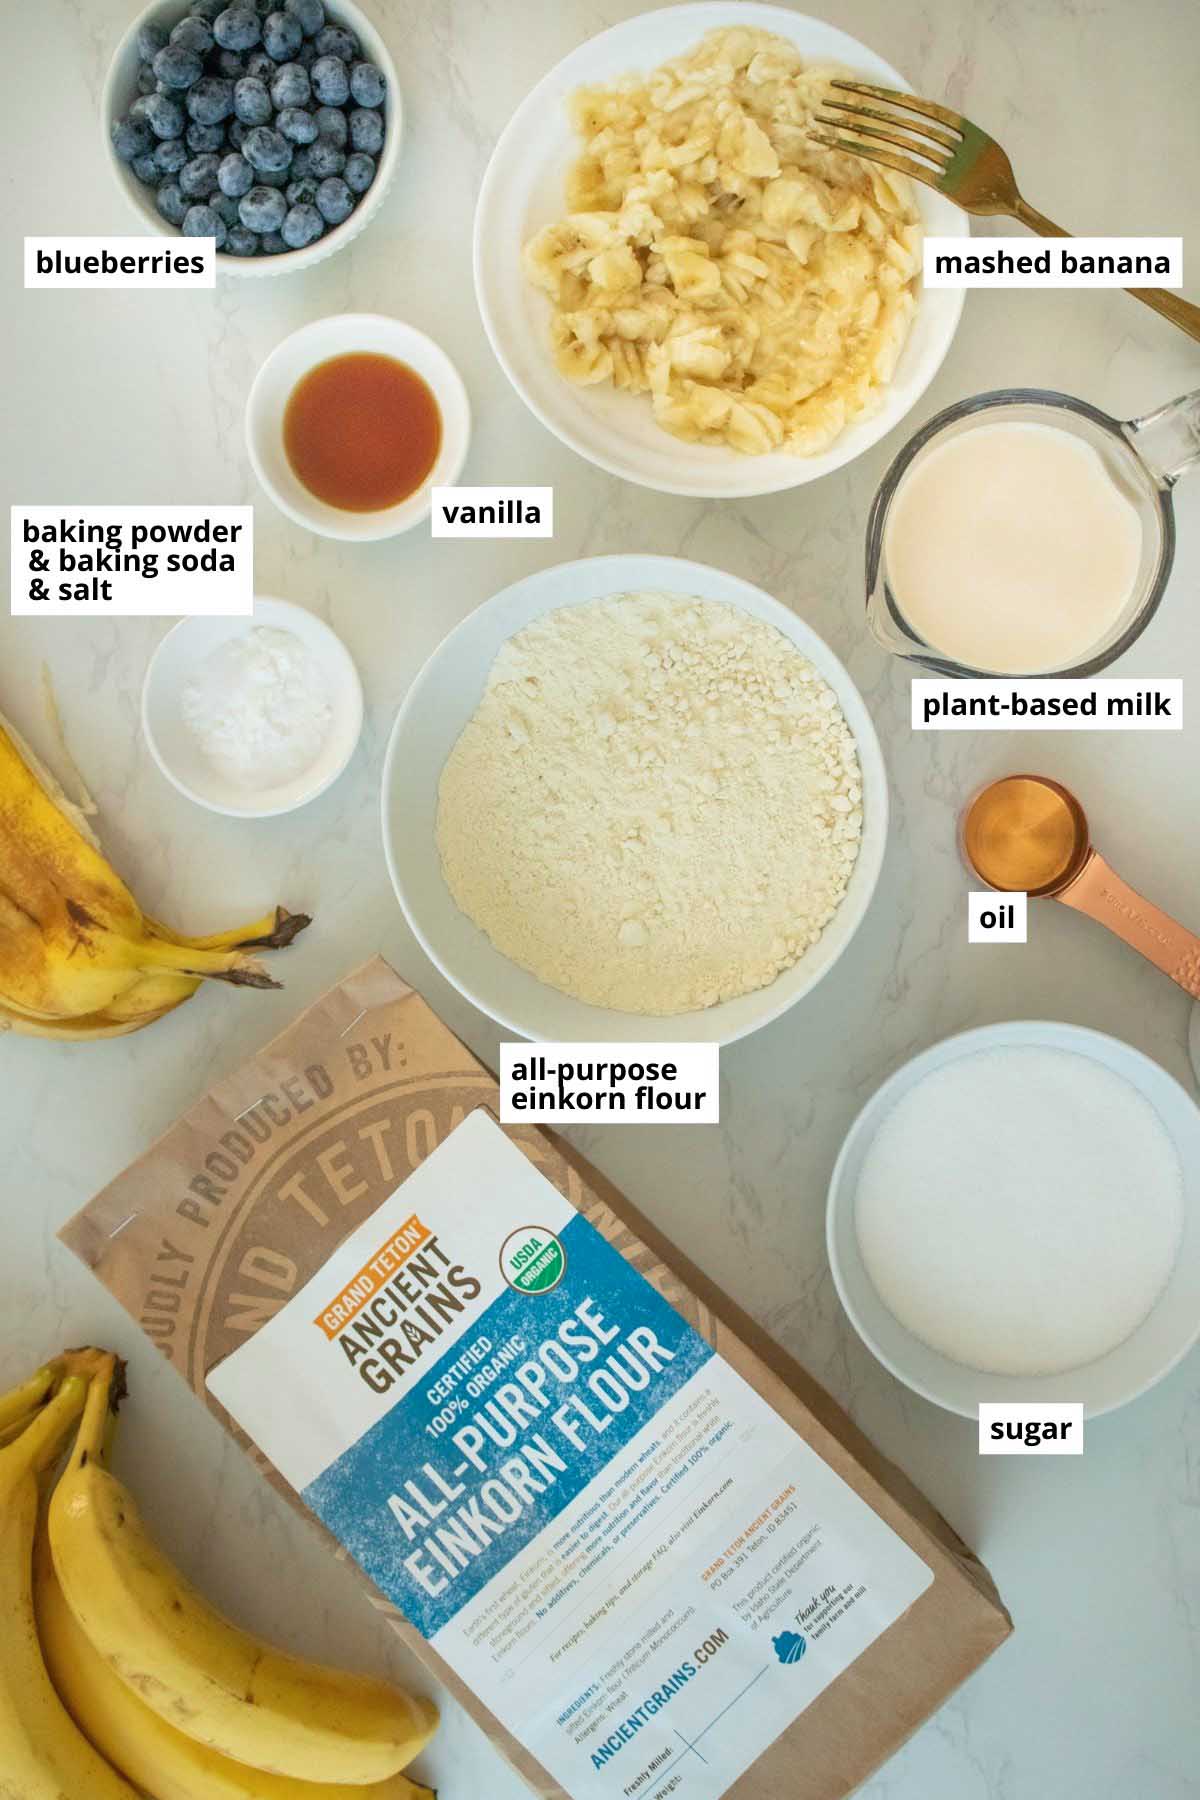 einkorn flour, mashed bananas, blueberries, and other muffin ingredients in bowls on a white table next to a bag of einkorn flour